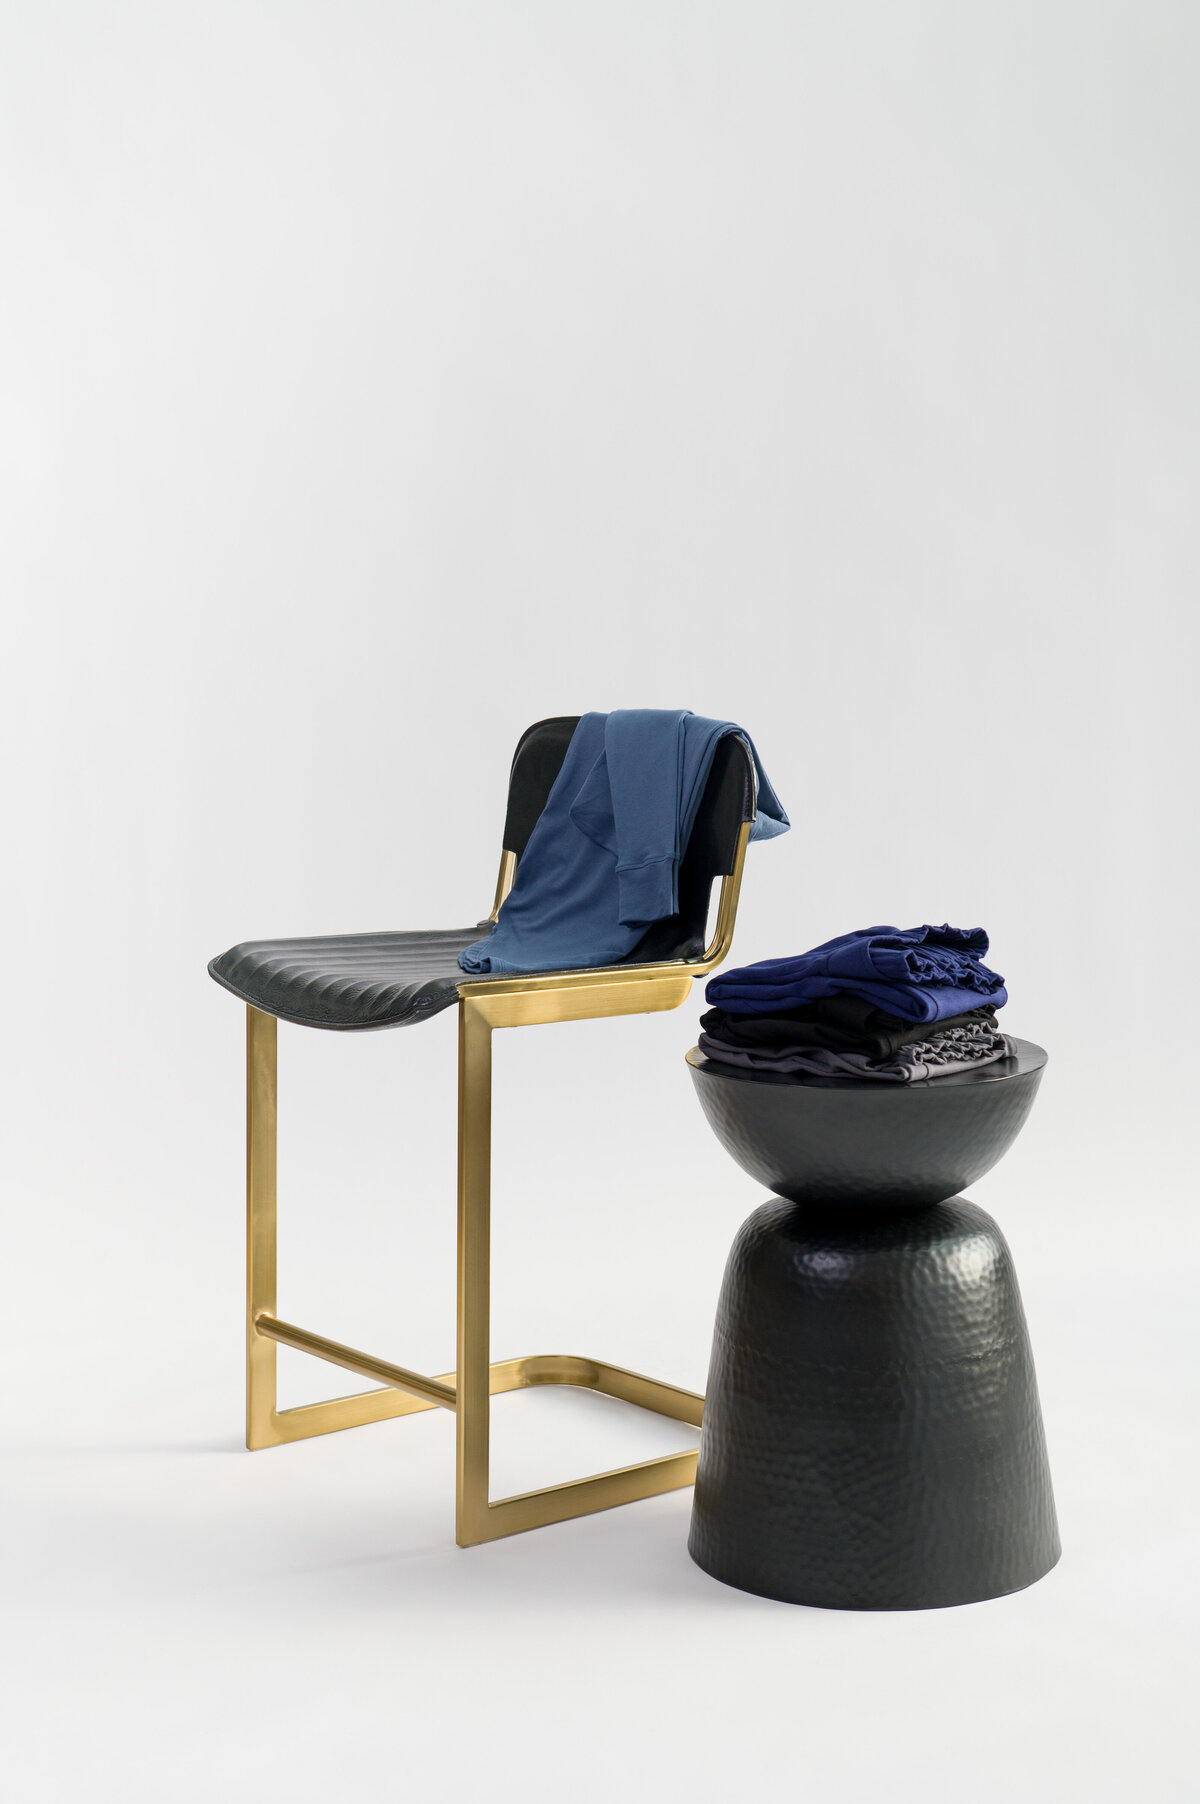 Clothing folded sitting on gold and black leather chair and black table